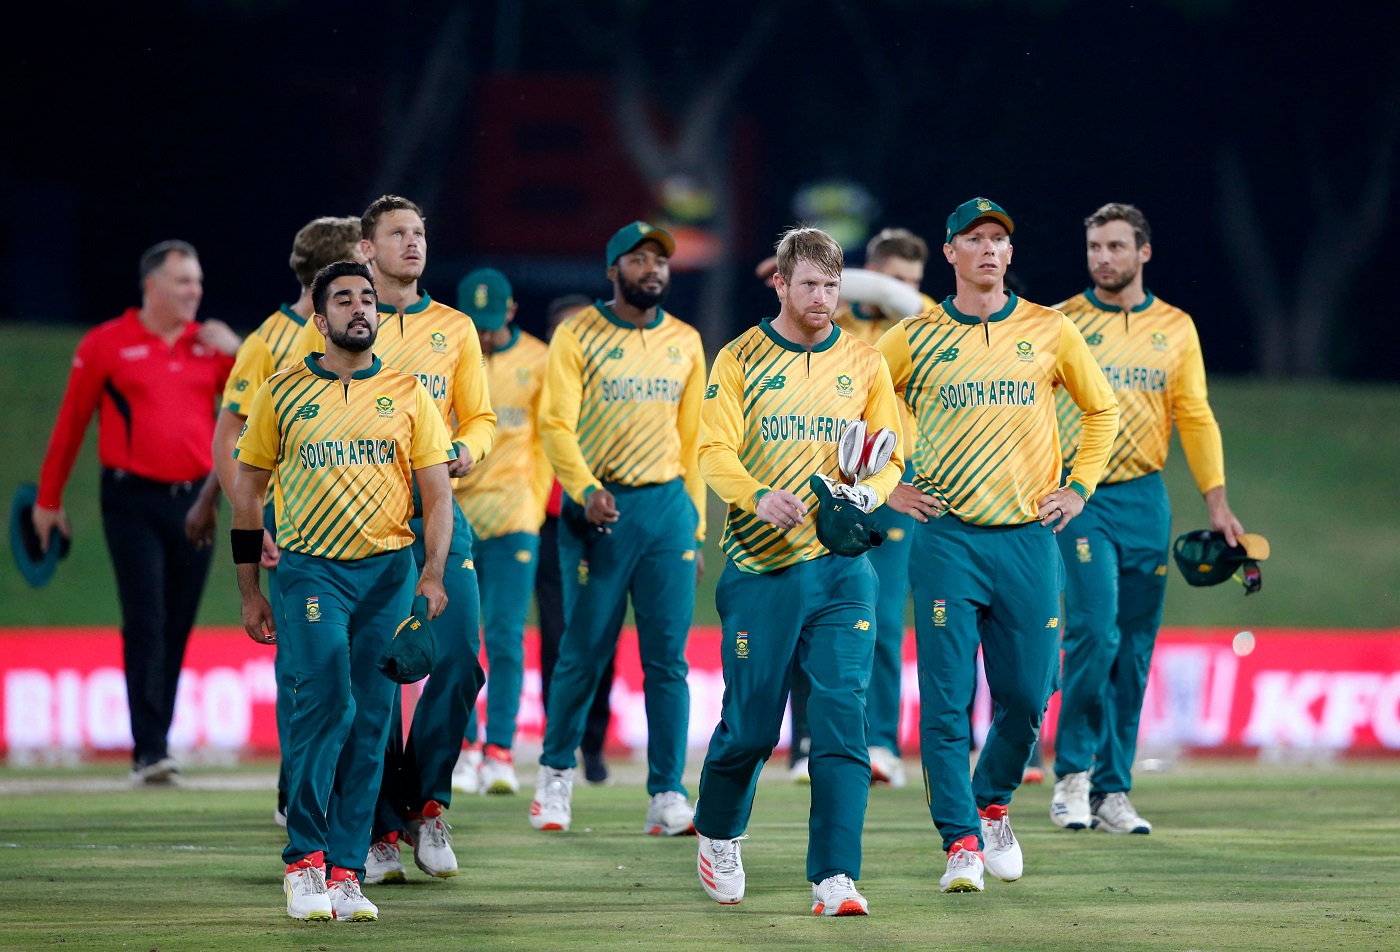 Match Preview Africa vs Pakistan, Pakistan tour of South Africa 4th T20I